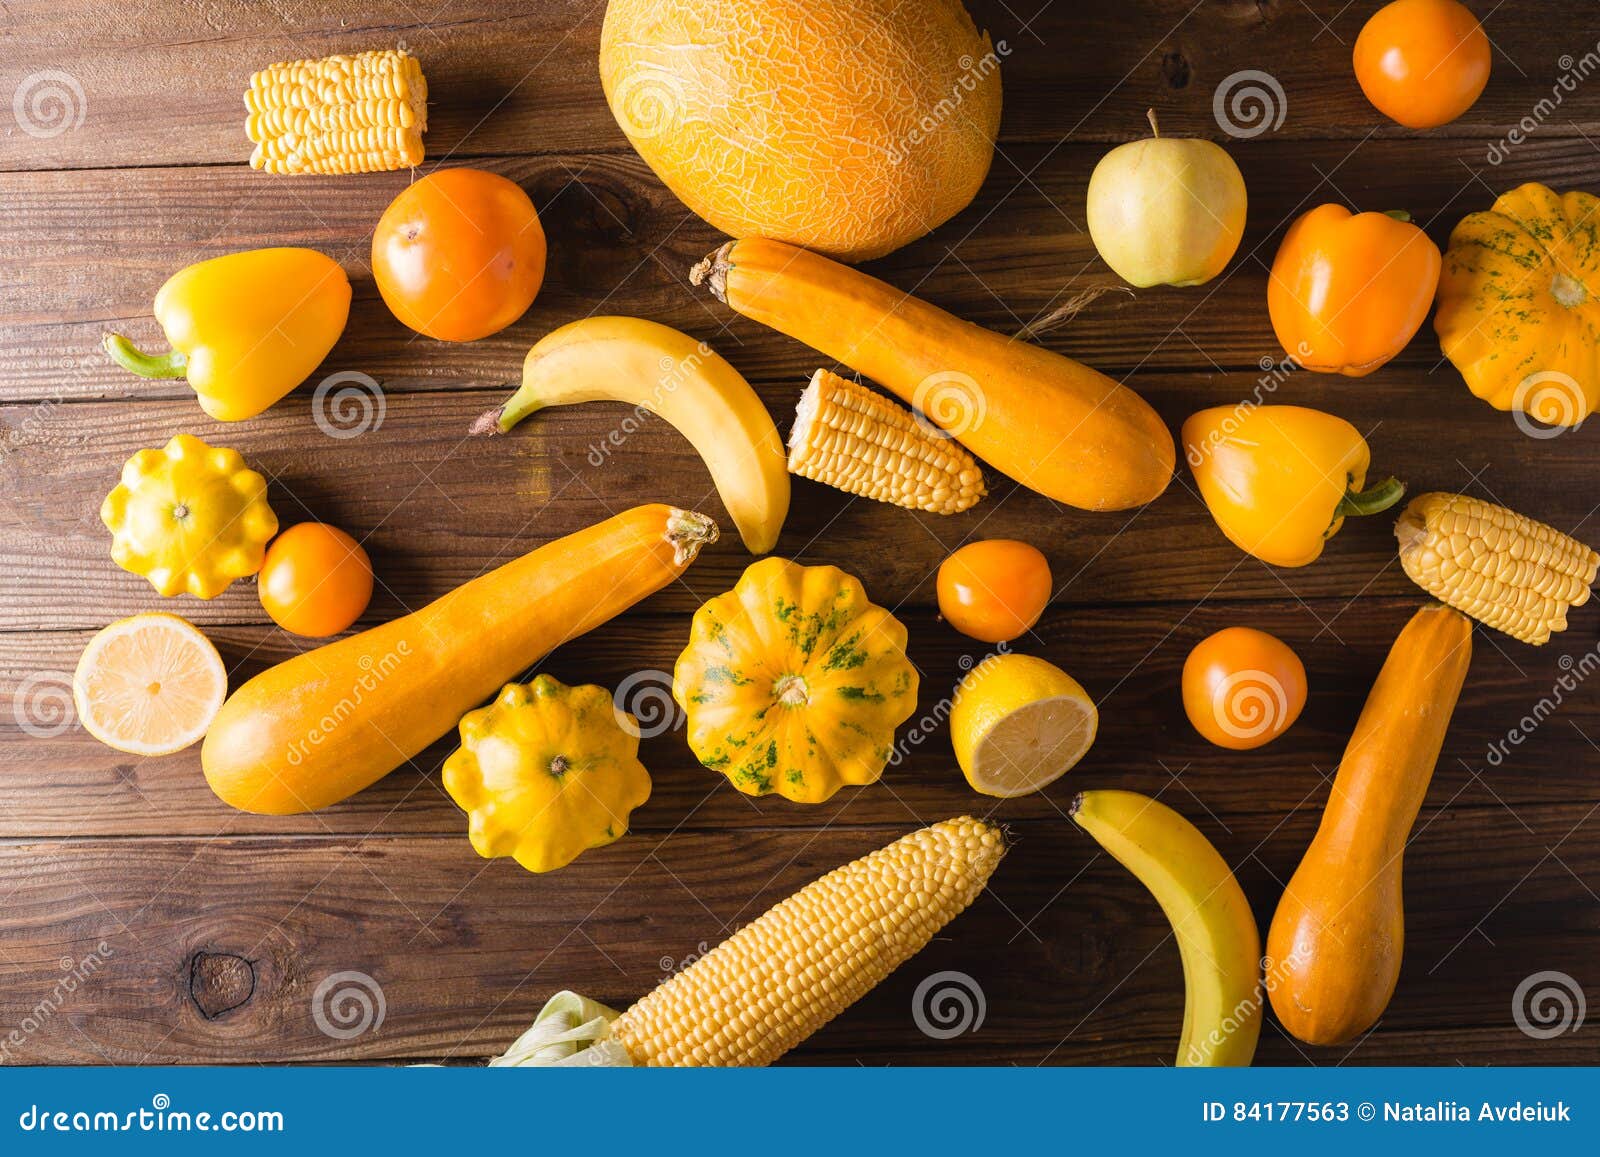 Yellow Fruits And Vegetables On A Wooden Background. Colorful Festive ...